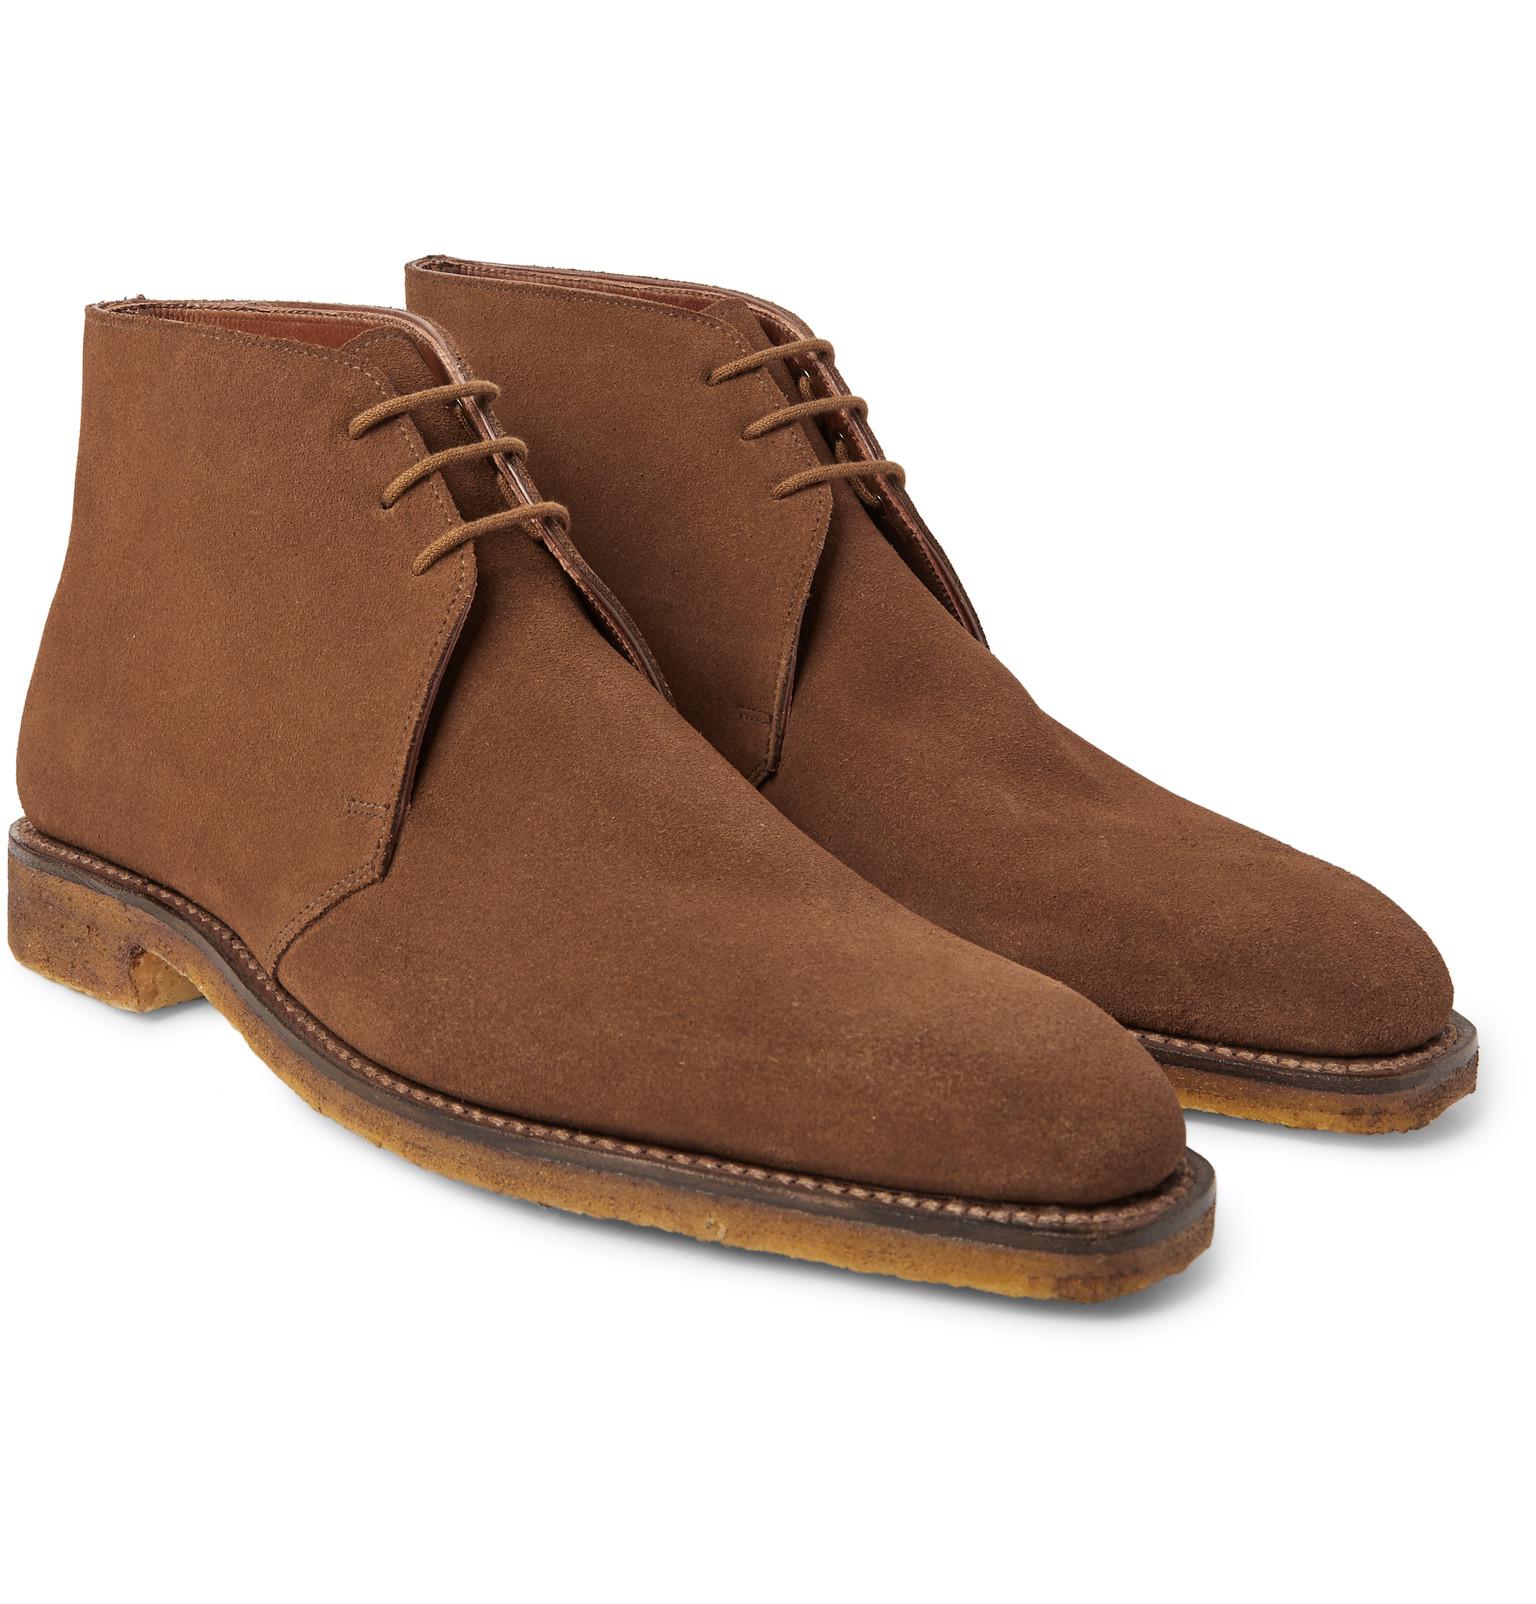 George Cleverley Suede Chukka Boots in Brown for Men - Lyst